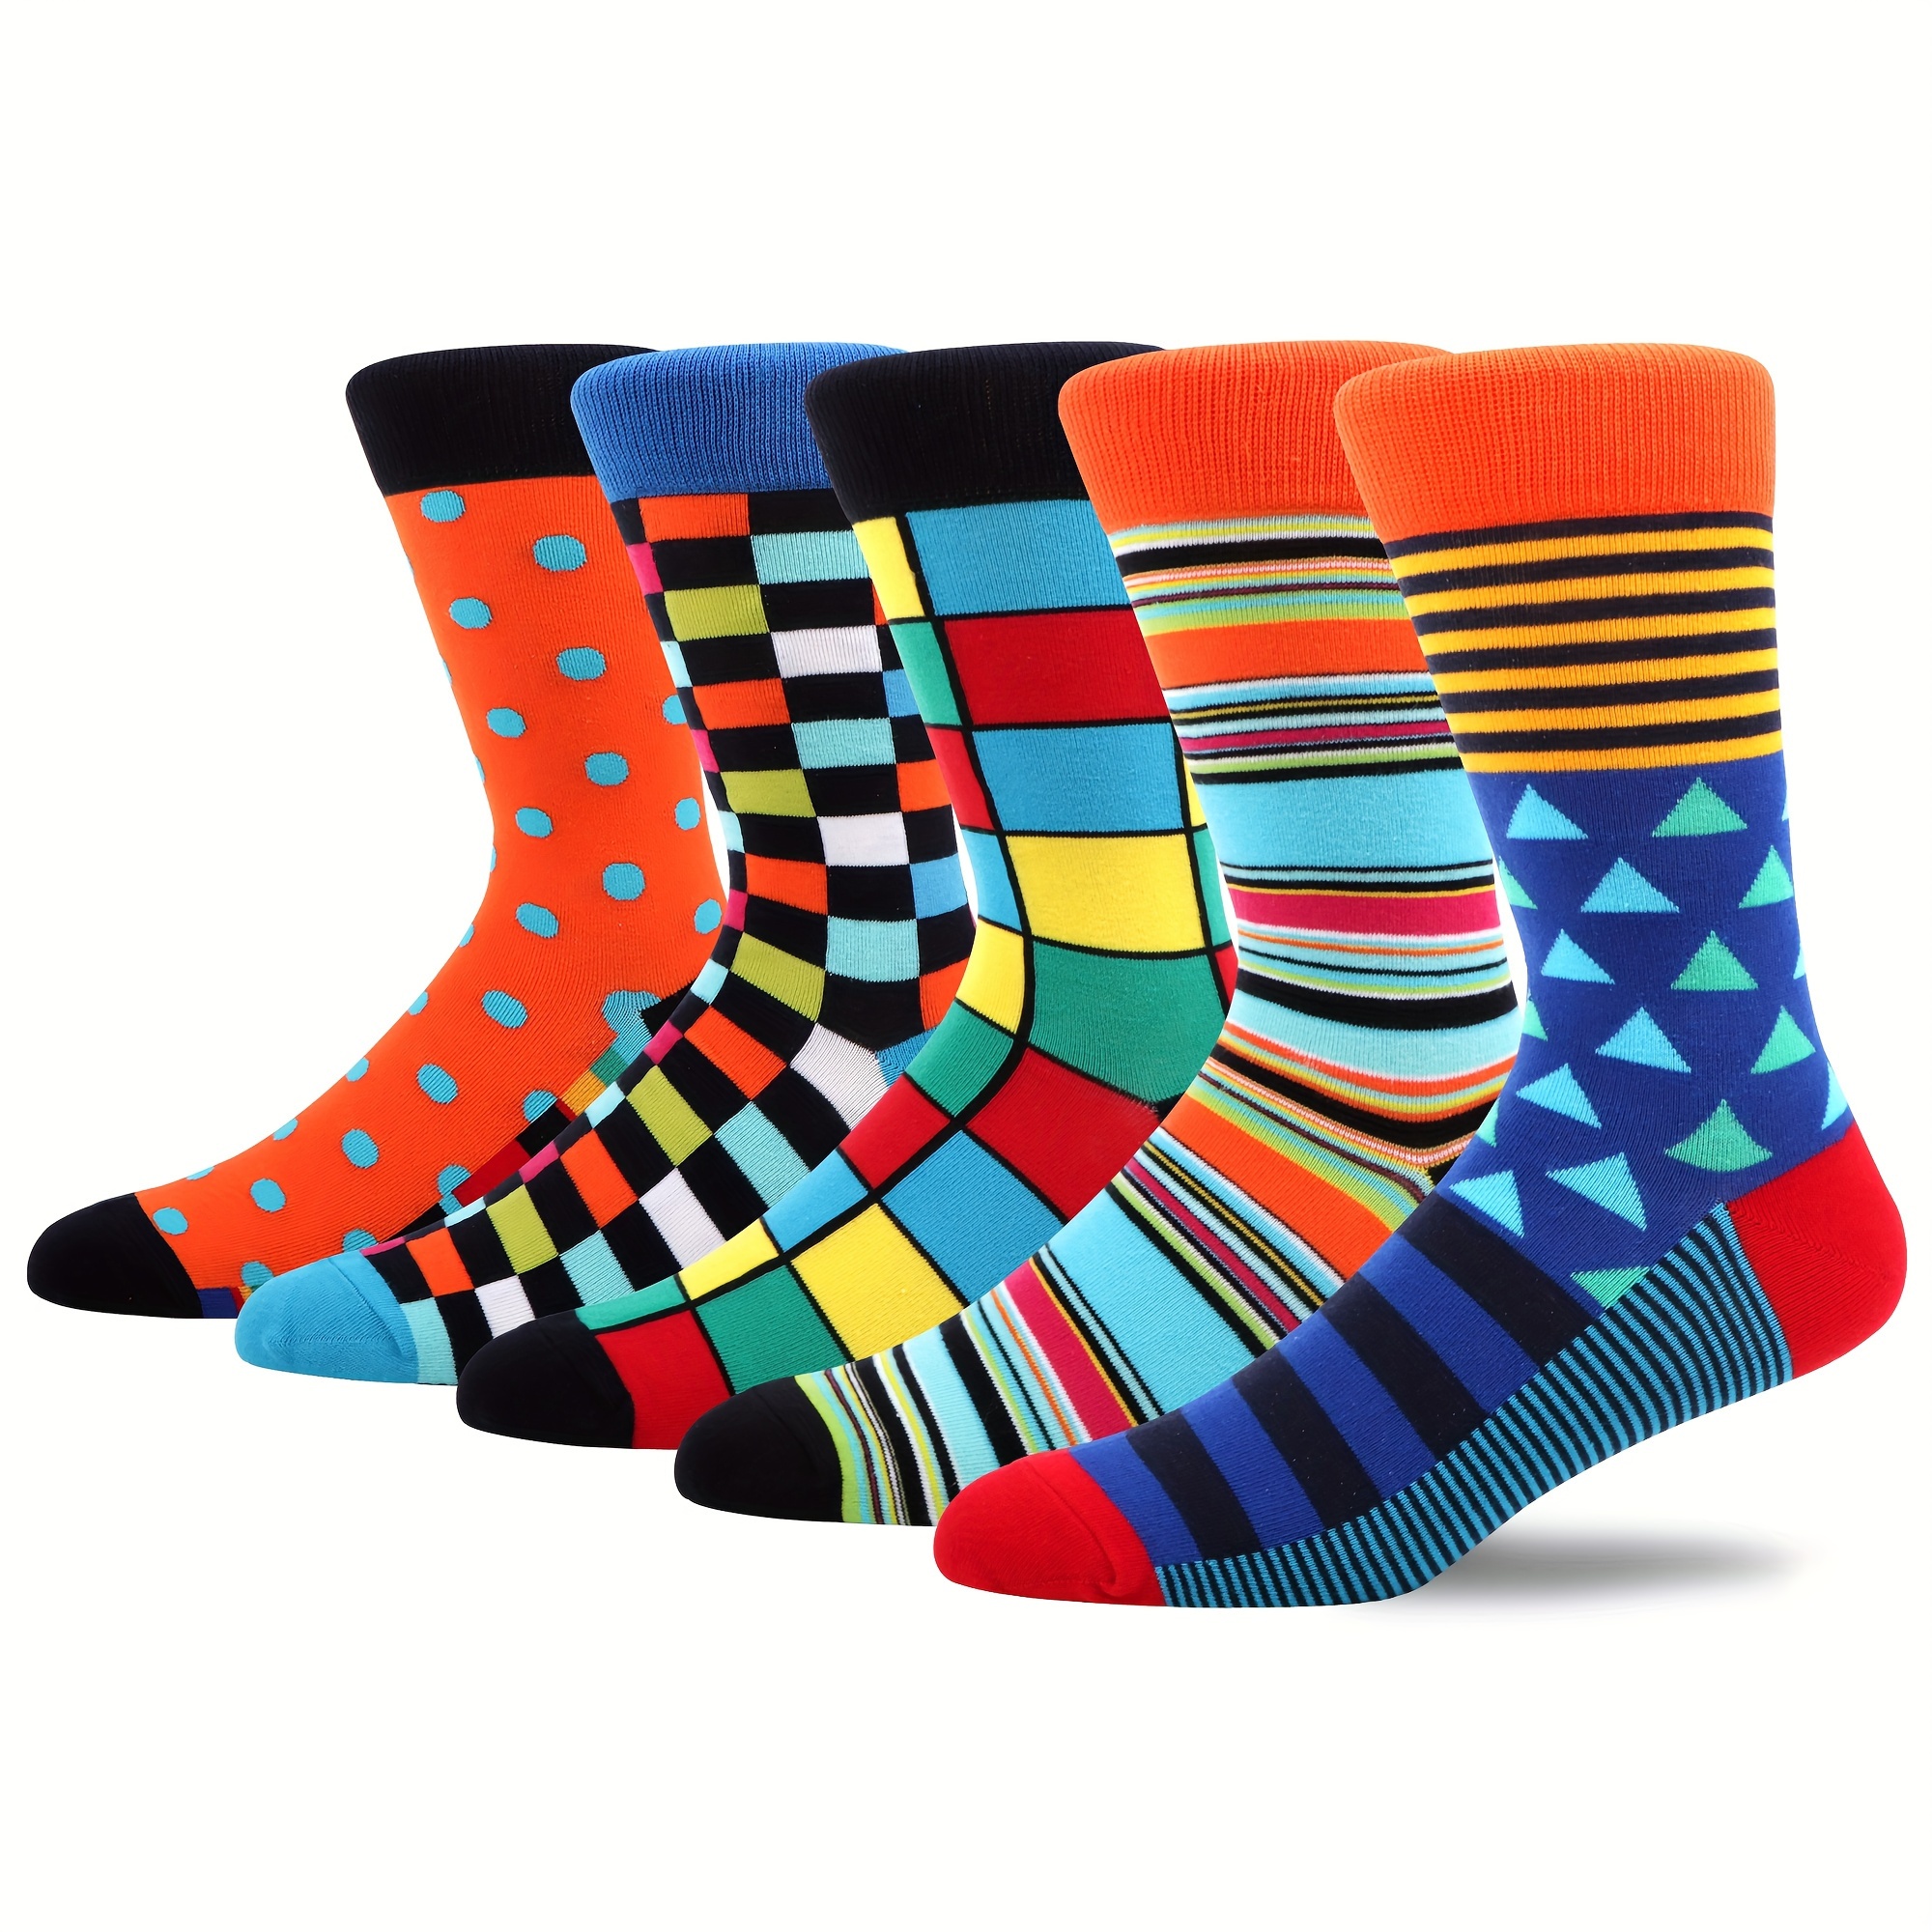 

5 Pairs Of Men's Trendy Stripe Checkered Pattern Crew Socks, Breathable Cotton Blend Comfy Casual Unisex Socks For Men's Outdoor Wearing